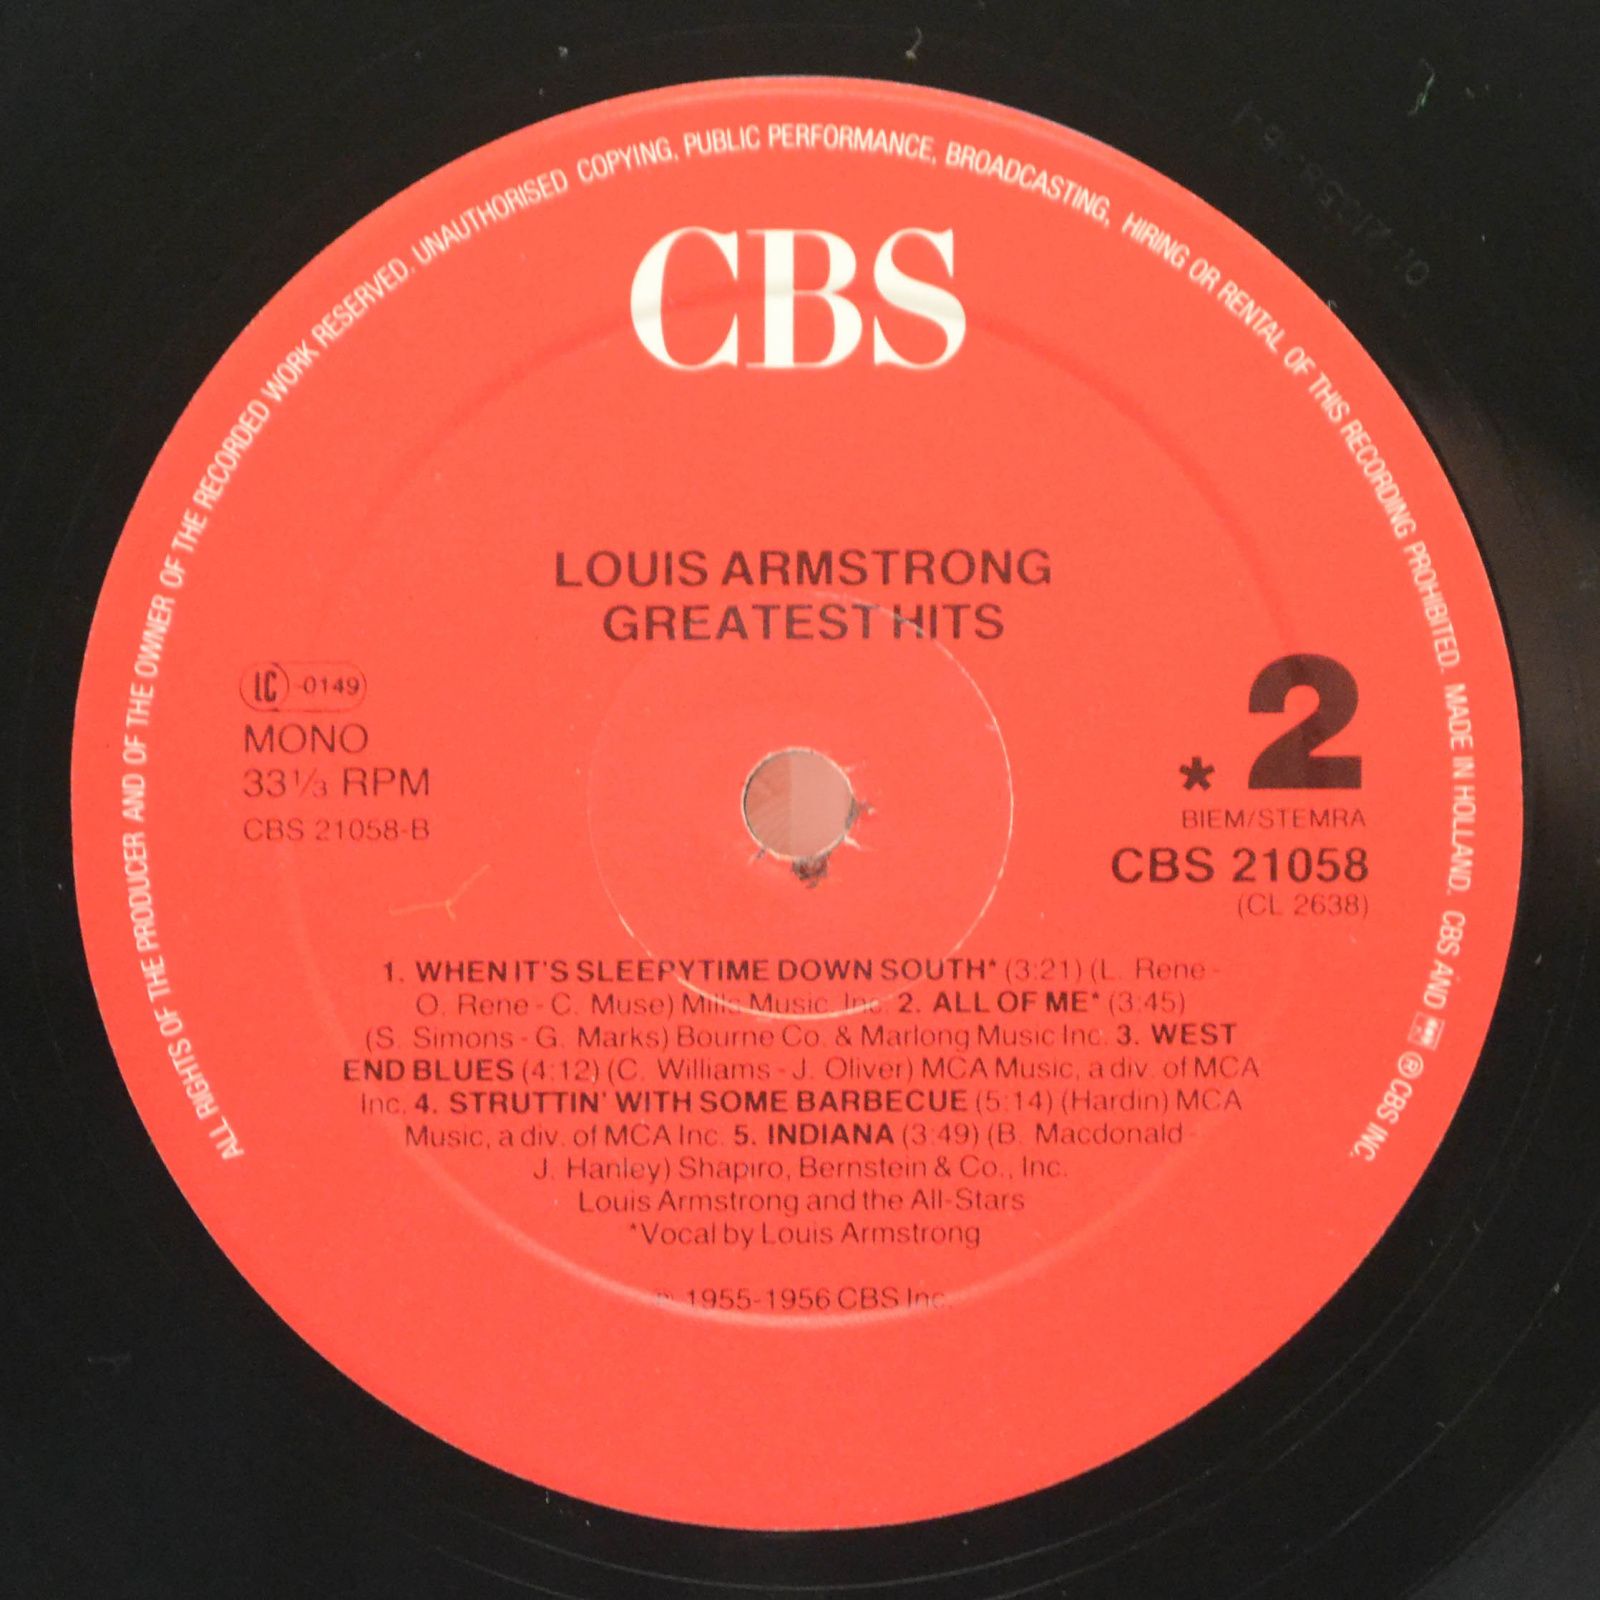 Louis Armstrong — Greatest Hits, 1983